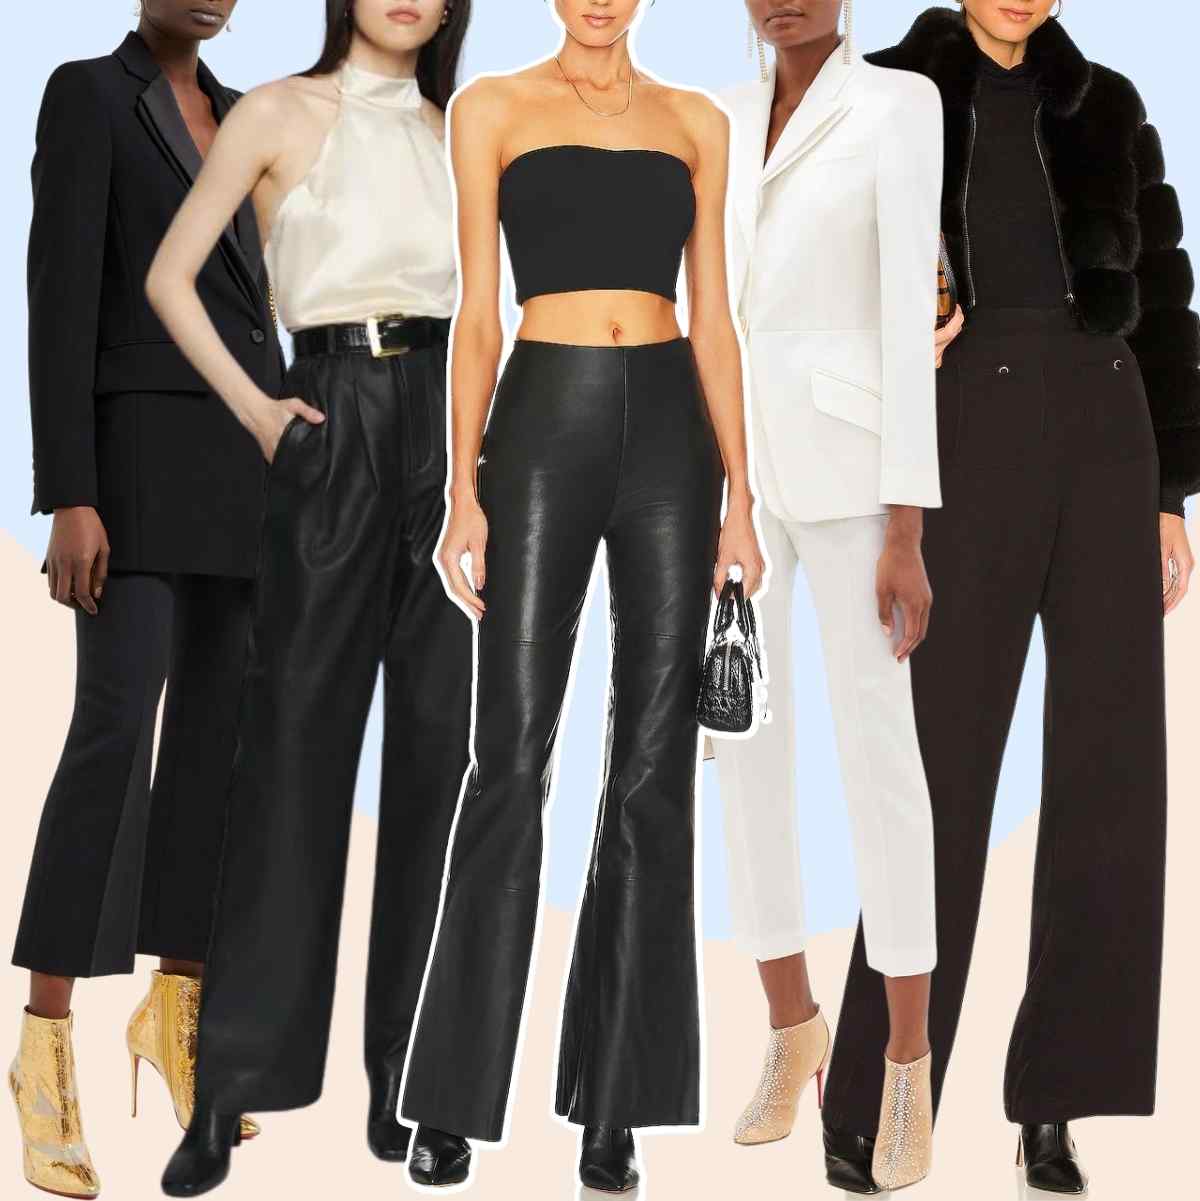 Collage of 5 women wearing different ankle boots with dress pants with fancy outfit.